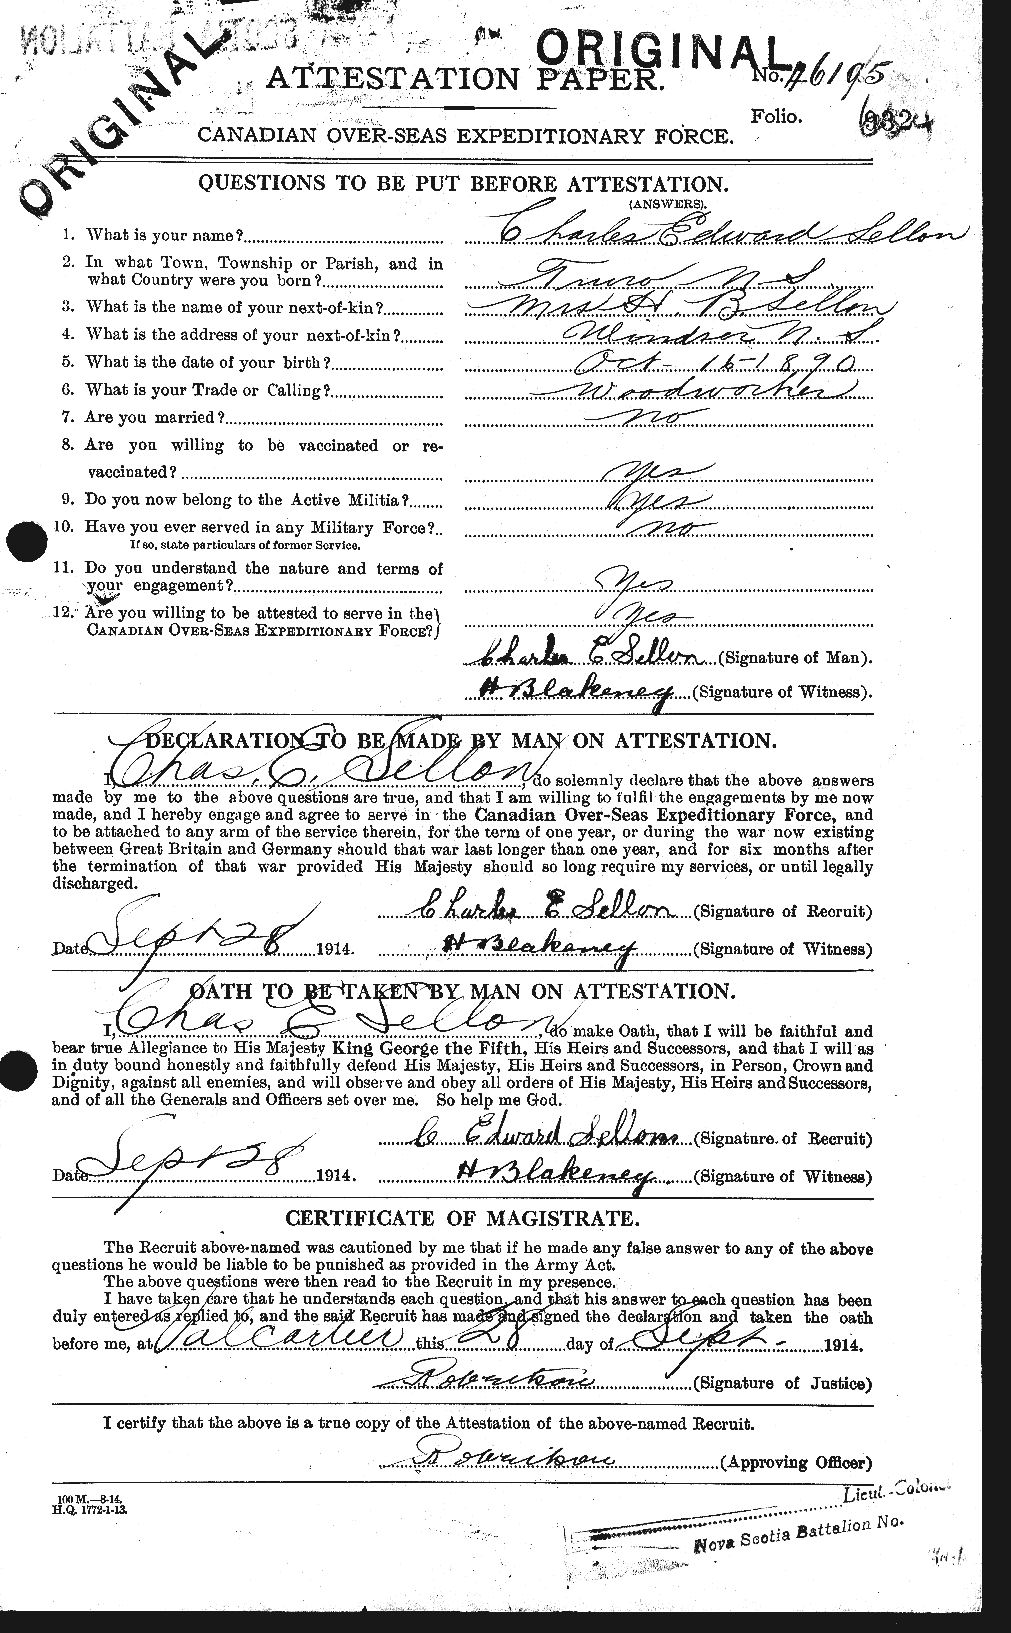 Personnel Records of the First World War - CEF 087503a